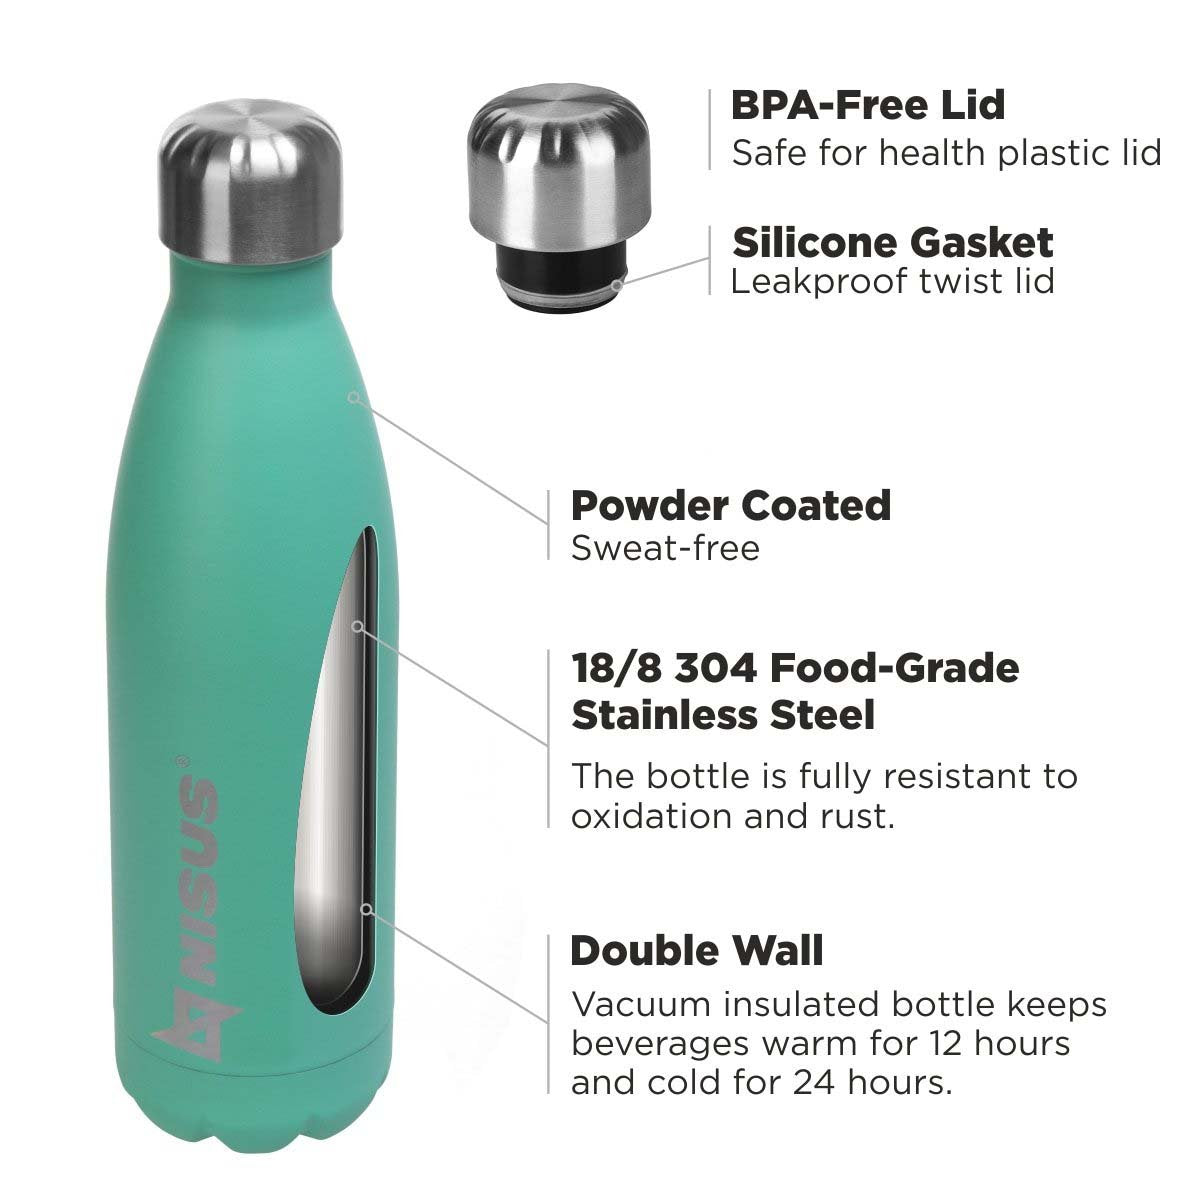 Stainless Steel Sport Water Bottle with 3 Lid Types, 18 oz – TONAREX